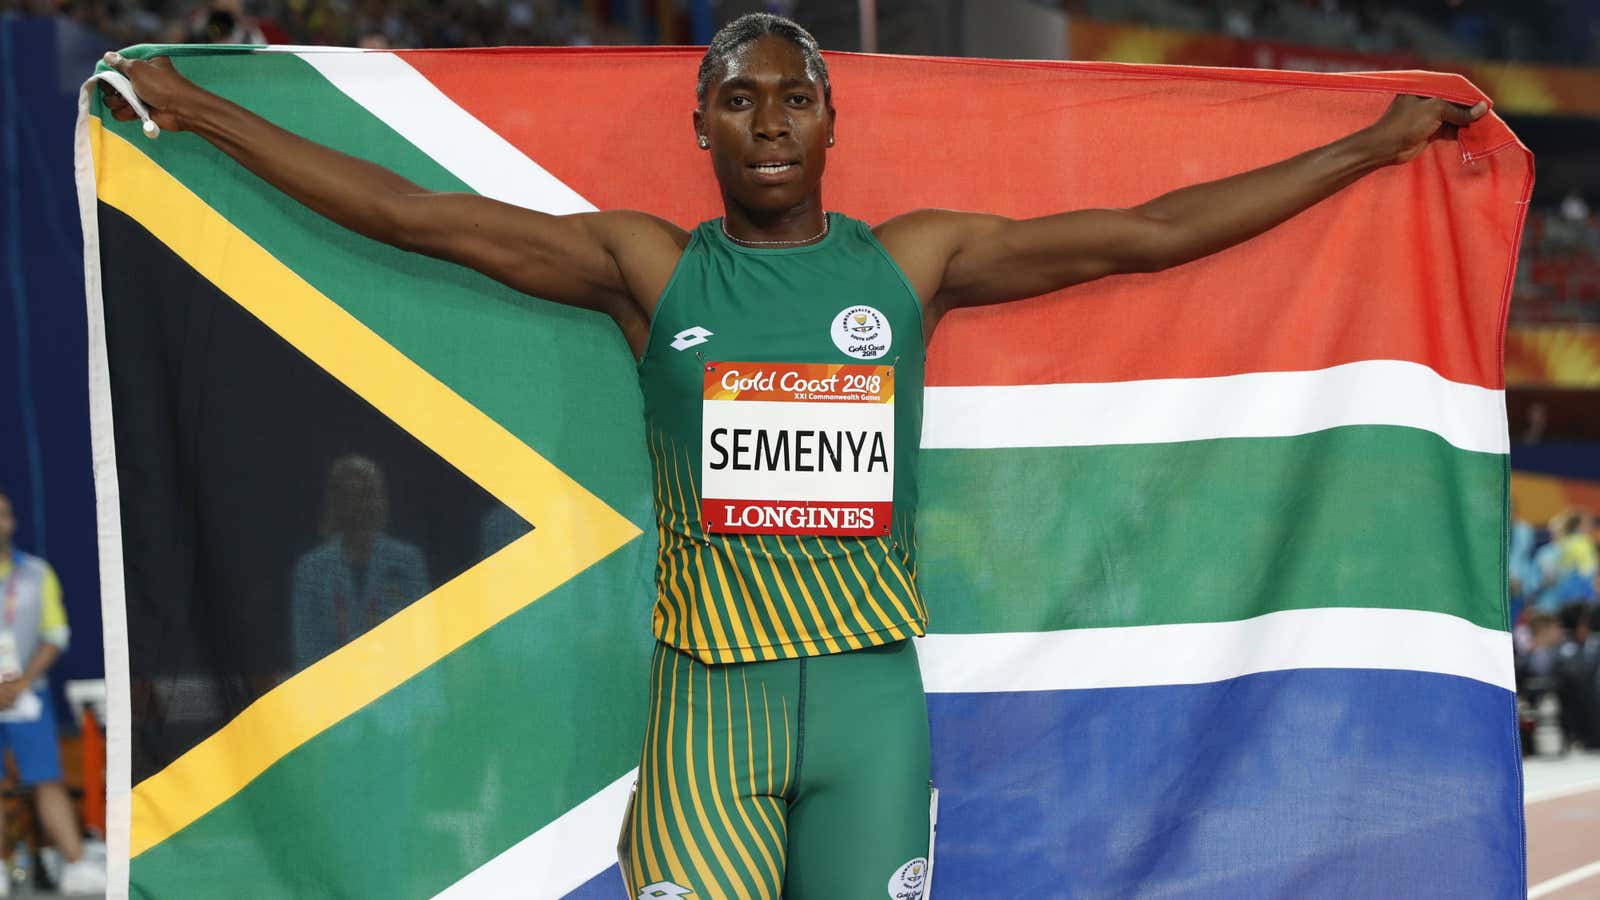 Caster Semenya won two gold medals at the 2018 Commonwealth Games.